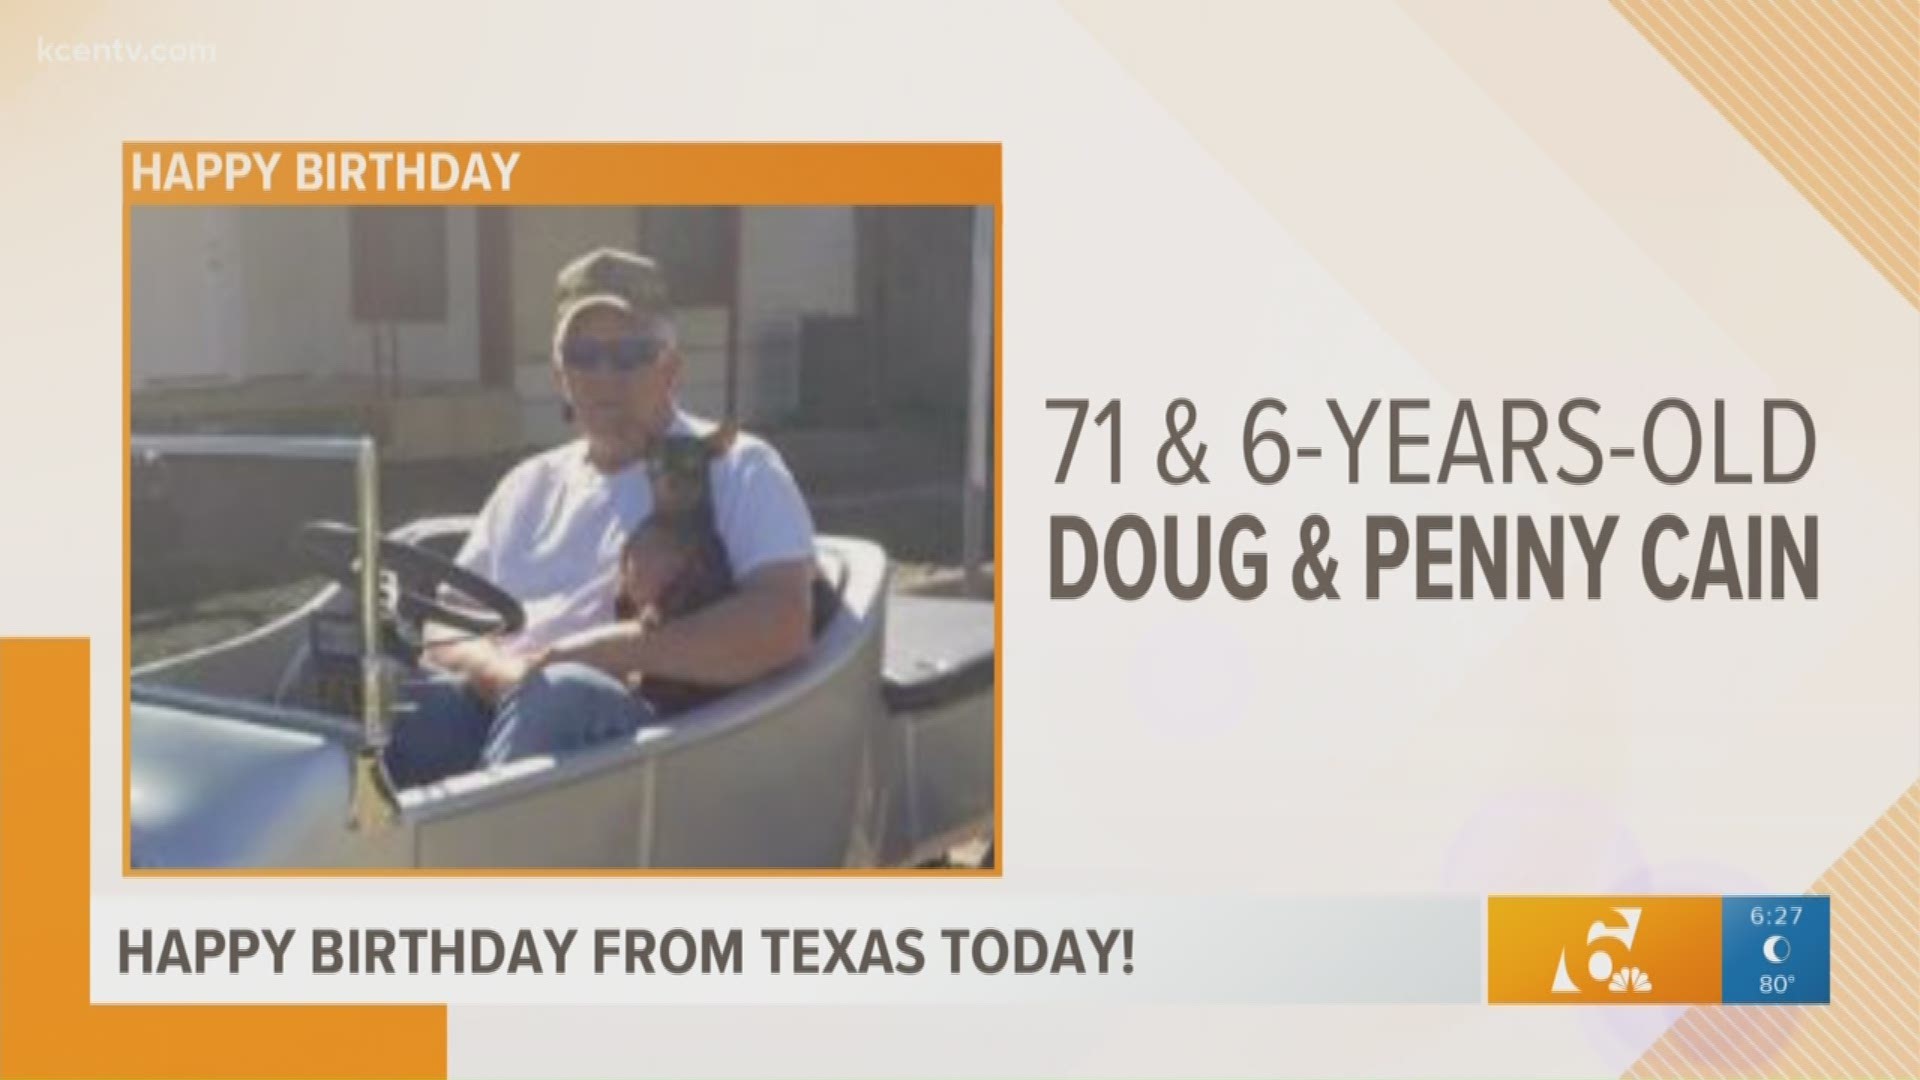 These are the birthdays we're celebrating on July 10, 2019.